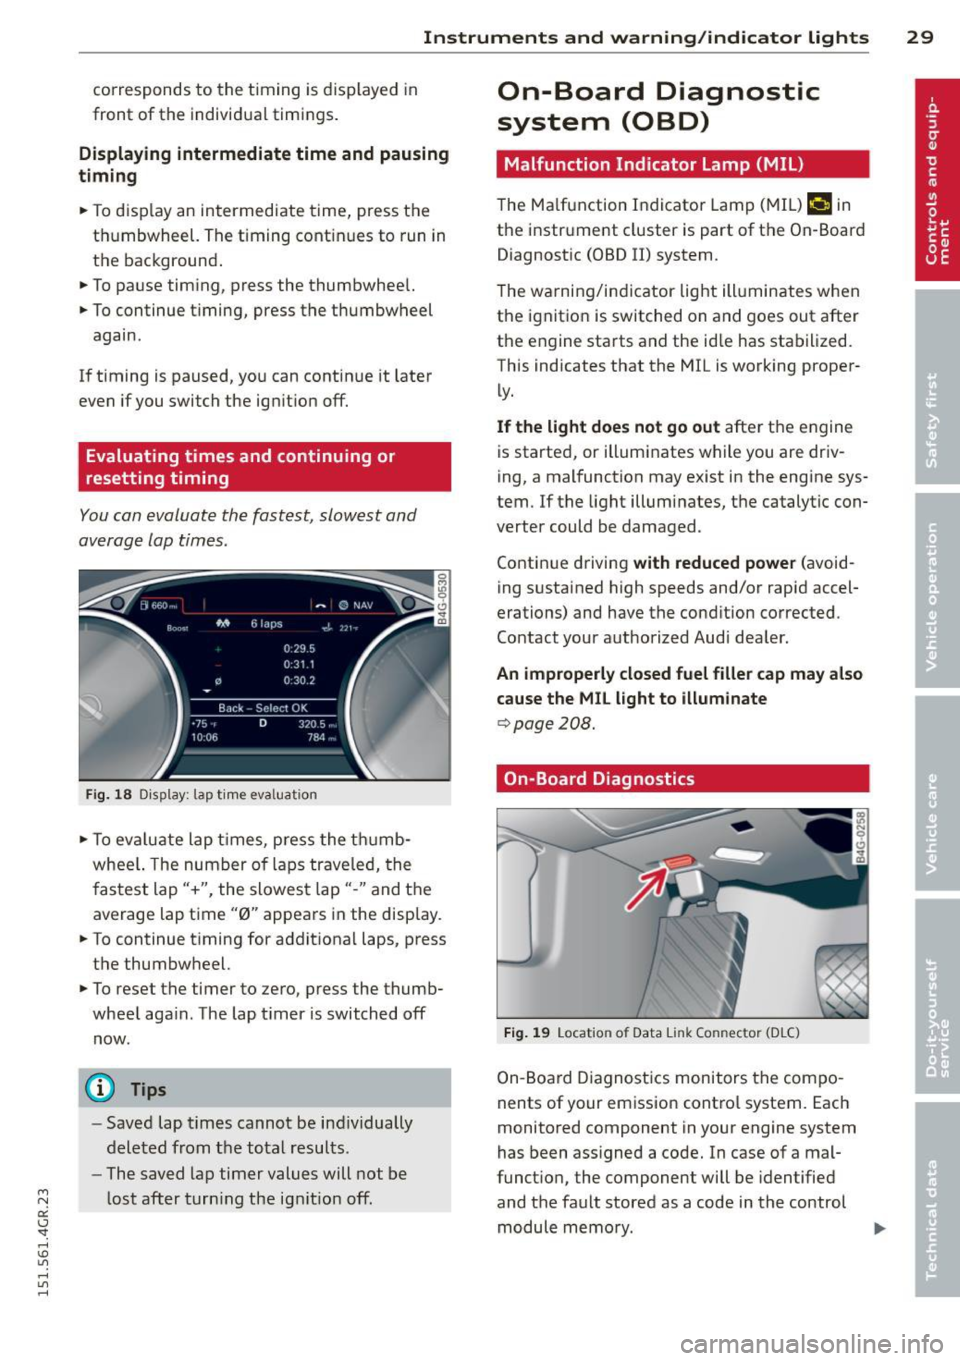 AUDI RS7 SPORTBACK 2015  Owners Manual " N 
a:: I.J "". rl I.O 
" rl 
" rl 
Instrument s  and  warning /indicator  lights  29 
corresponds  to  the  timing  is displayed  in 
front  of  the  ind ividual  timings . 
Displaying  intermedi